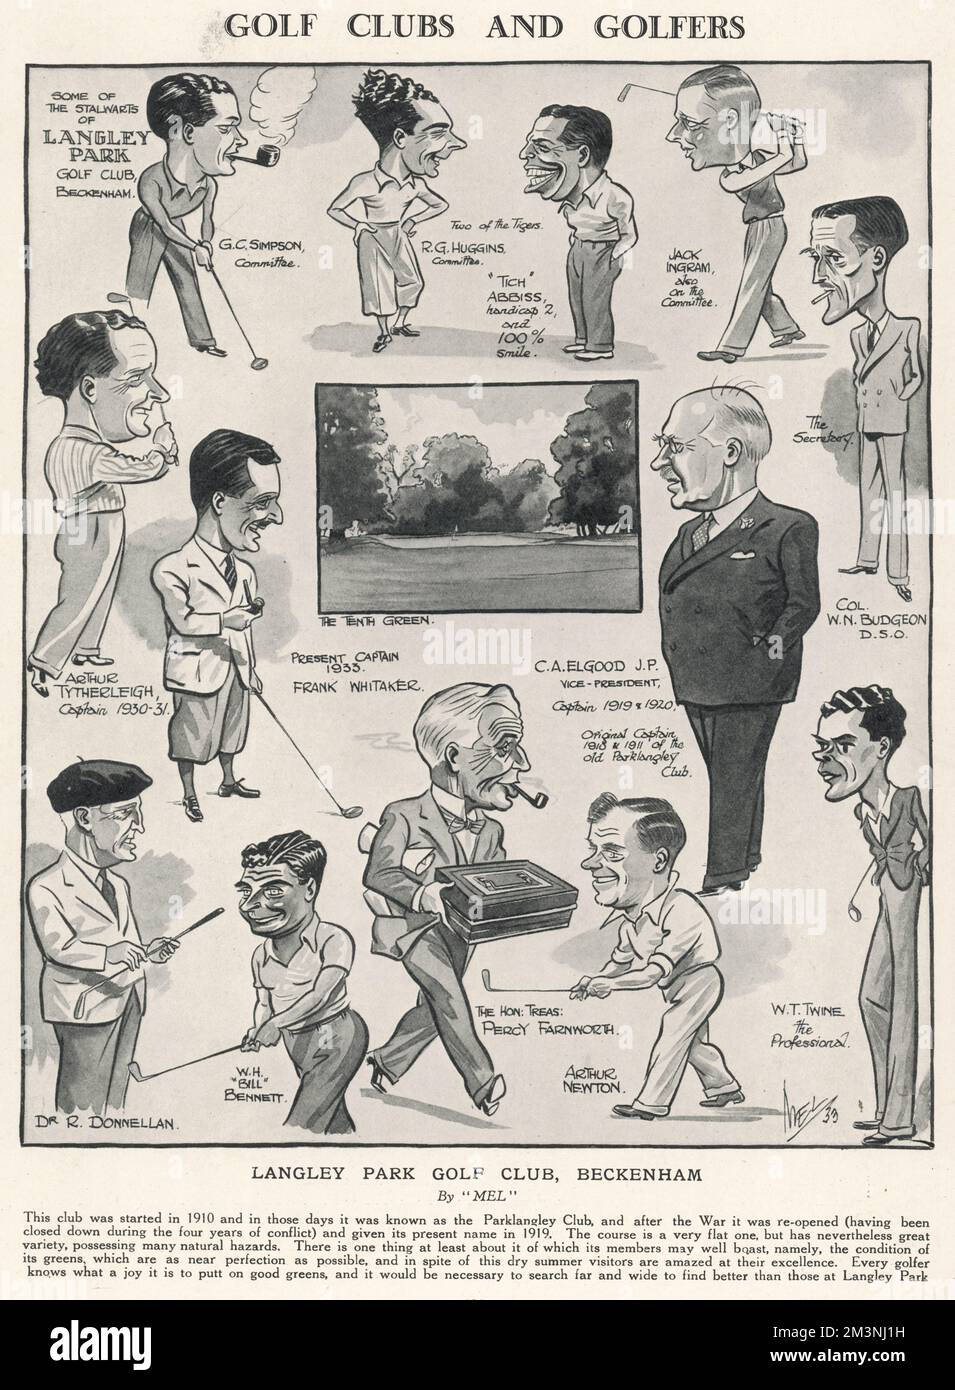 Series of caricatures of the members of Langley Park golf club in Beckenham, Kent which opened in 1910, and was originally known as Parklangley Club.  A flat course, it was renowned for its 'near-perfect greens'.      Date: 1933 Stock Photo